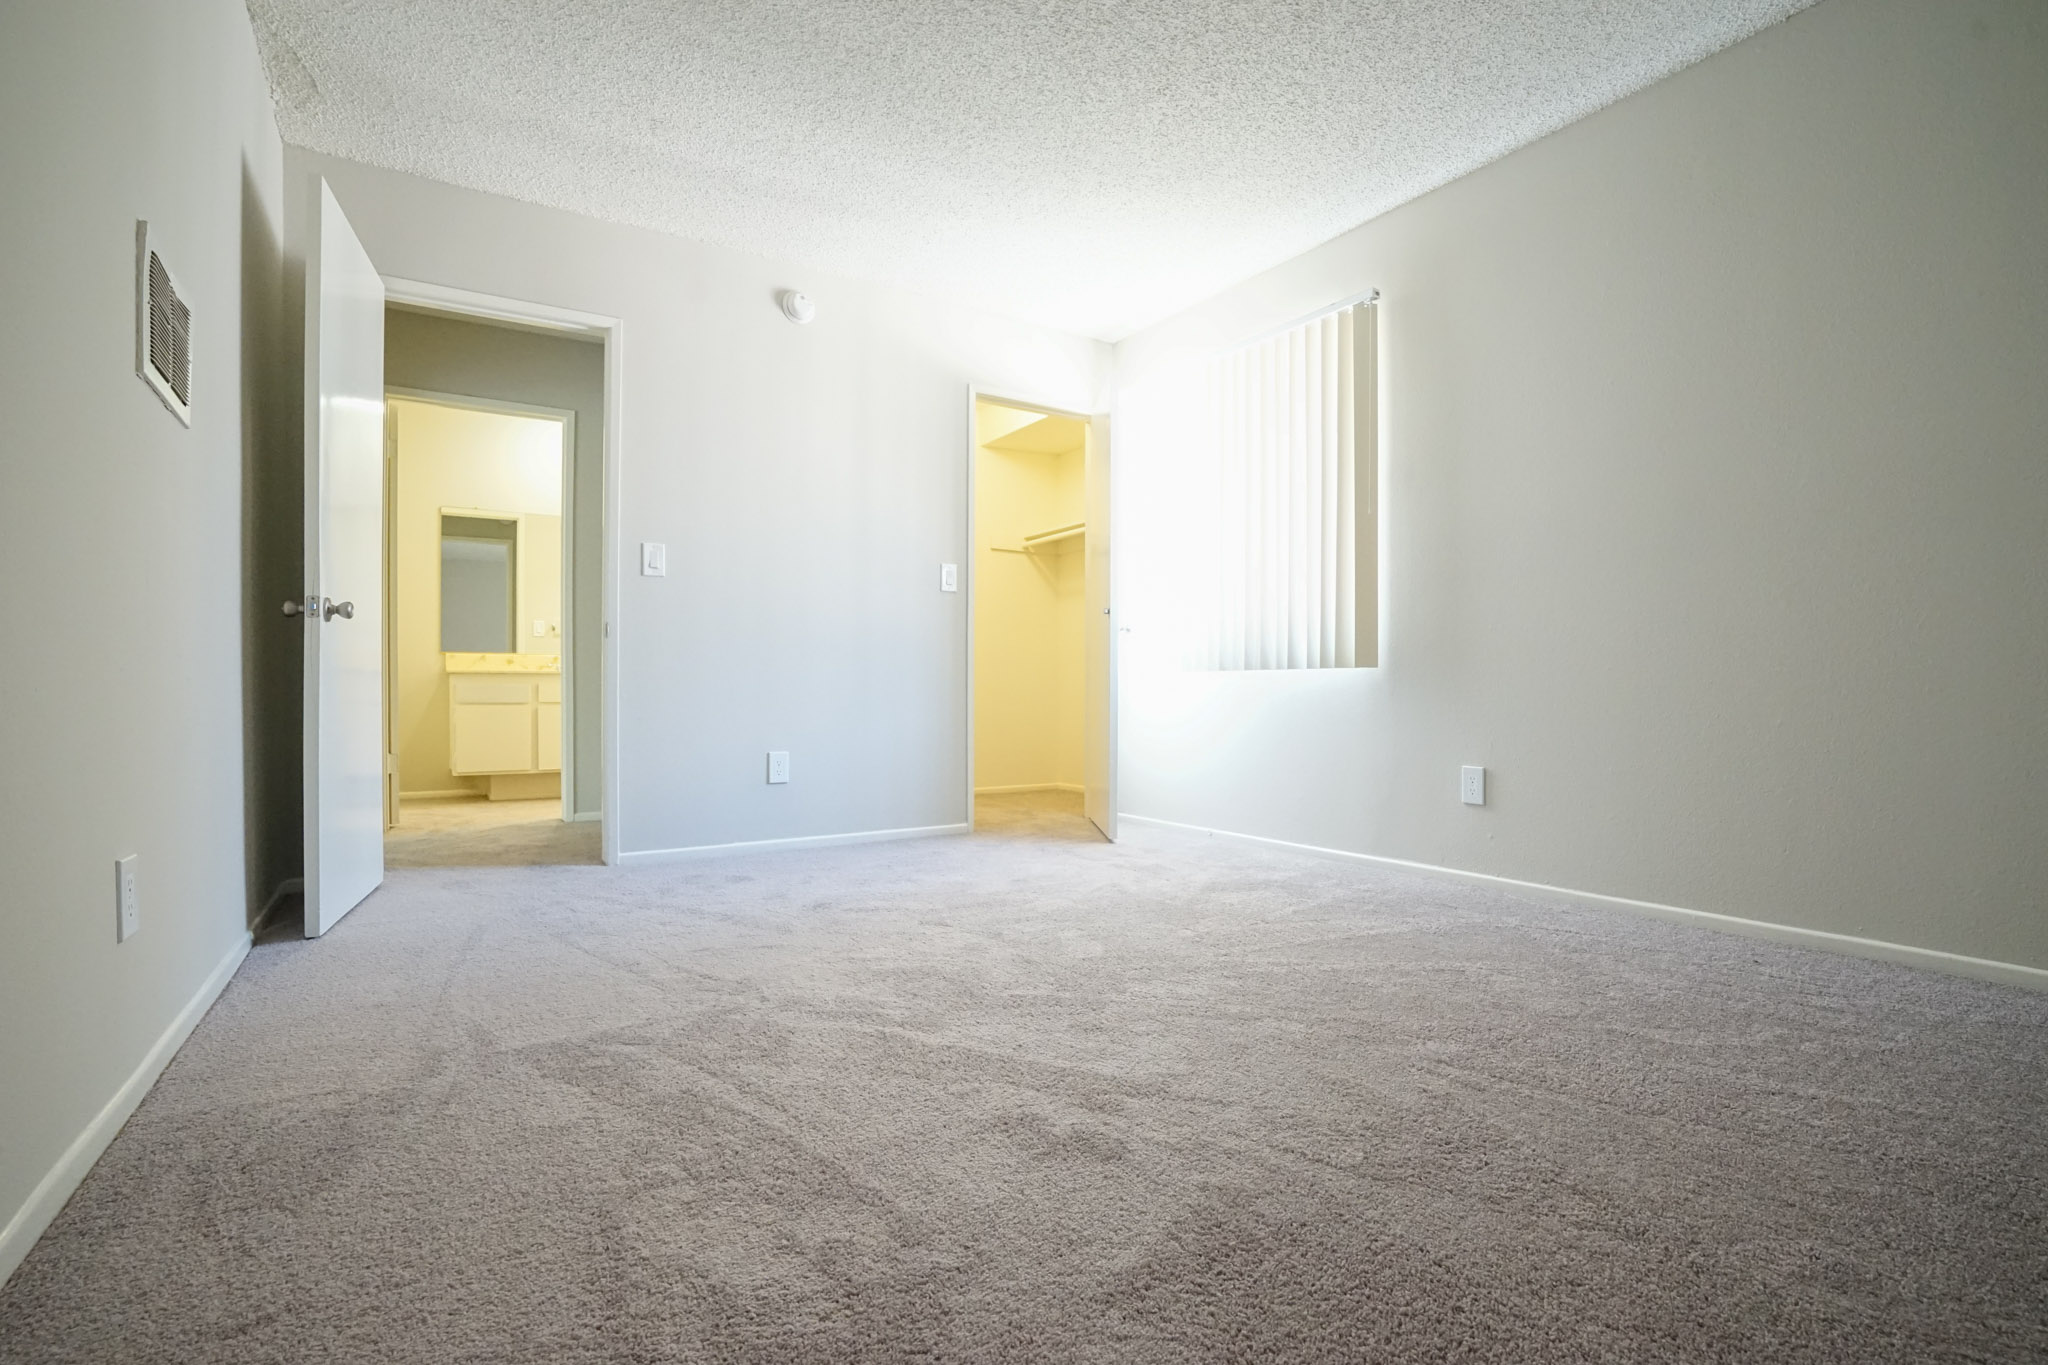 Different view of a bedroom with carpeted floors. Room has a window with blinds and a closet with a door. The bathroom is located across the entrance of the bedroom.